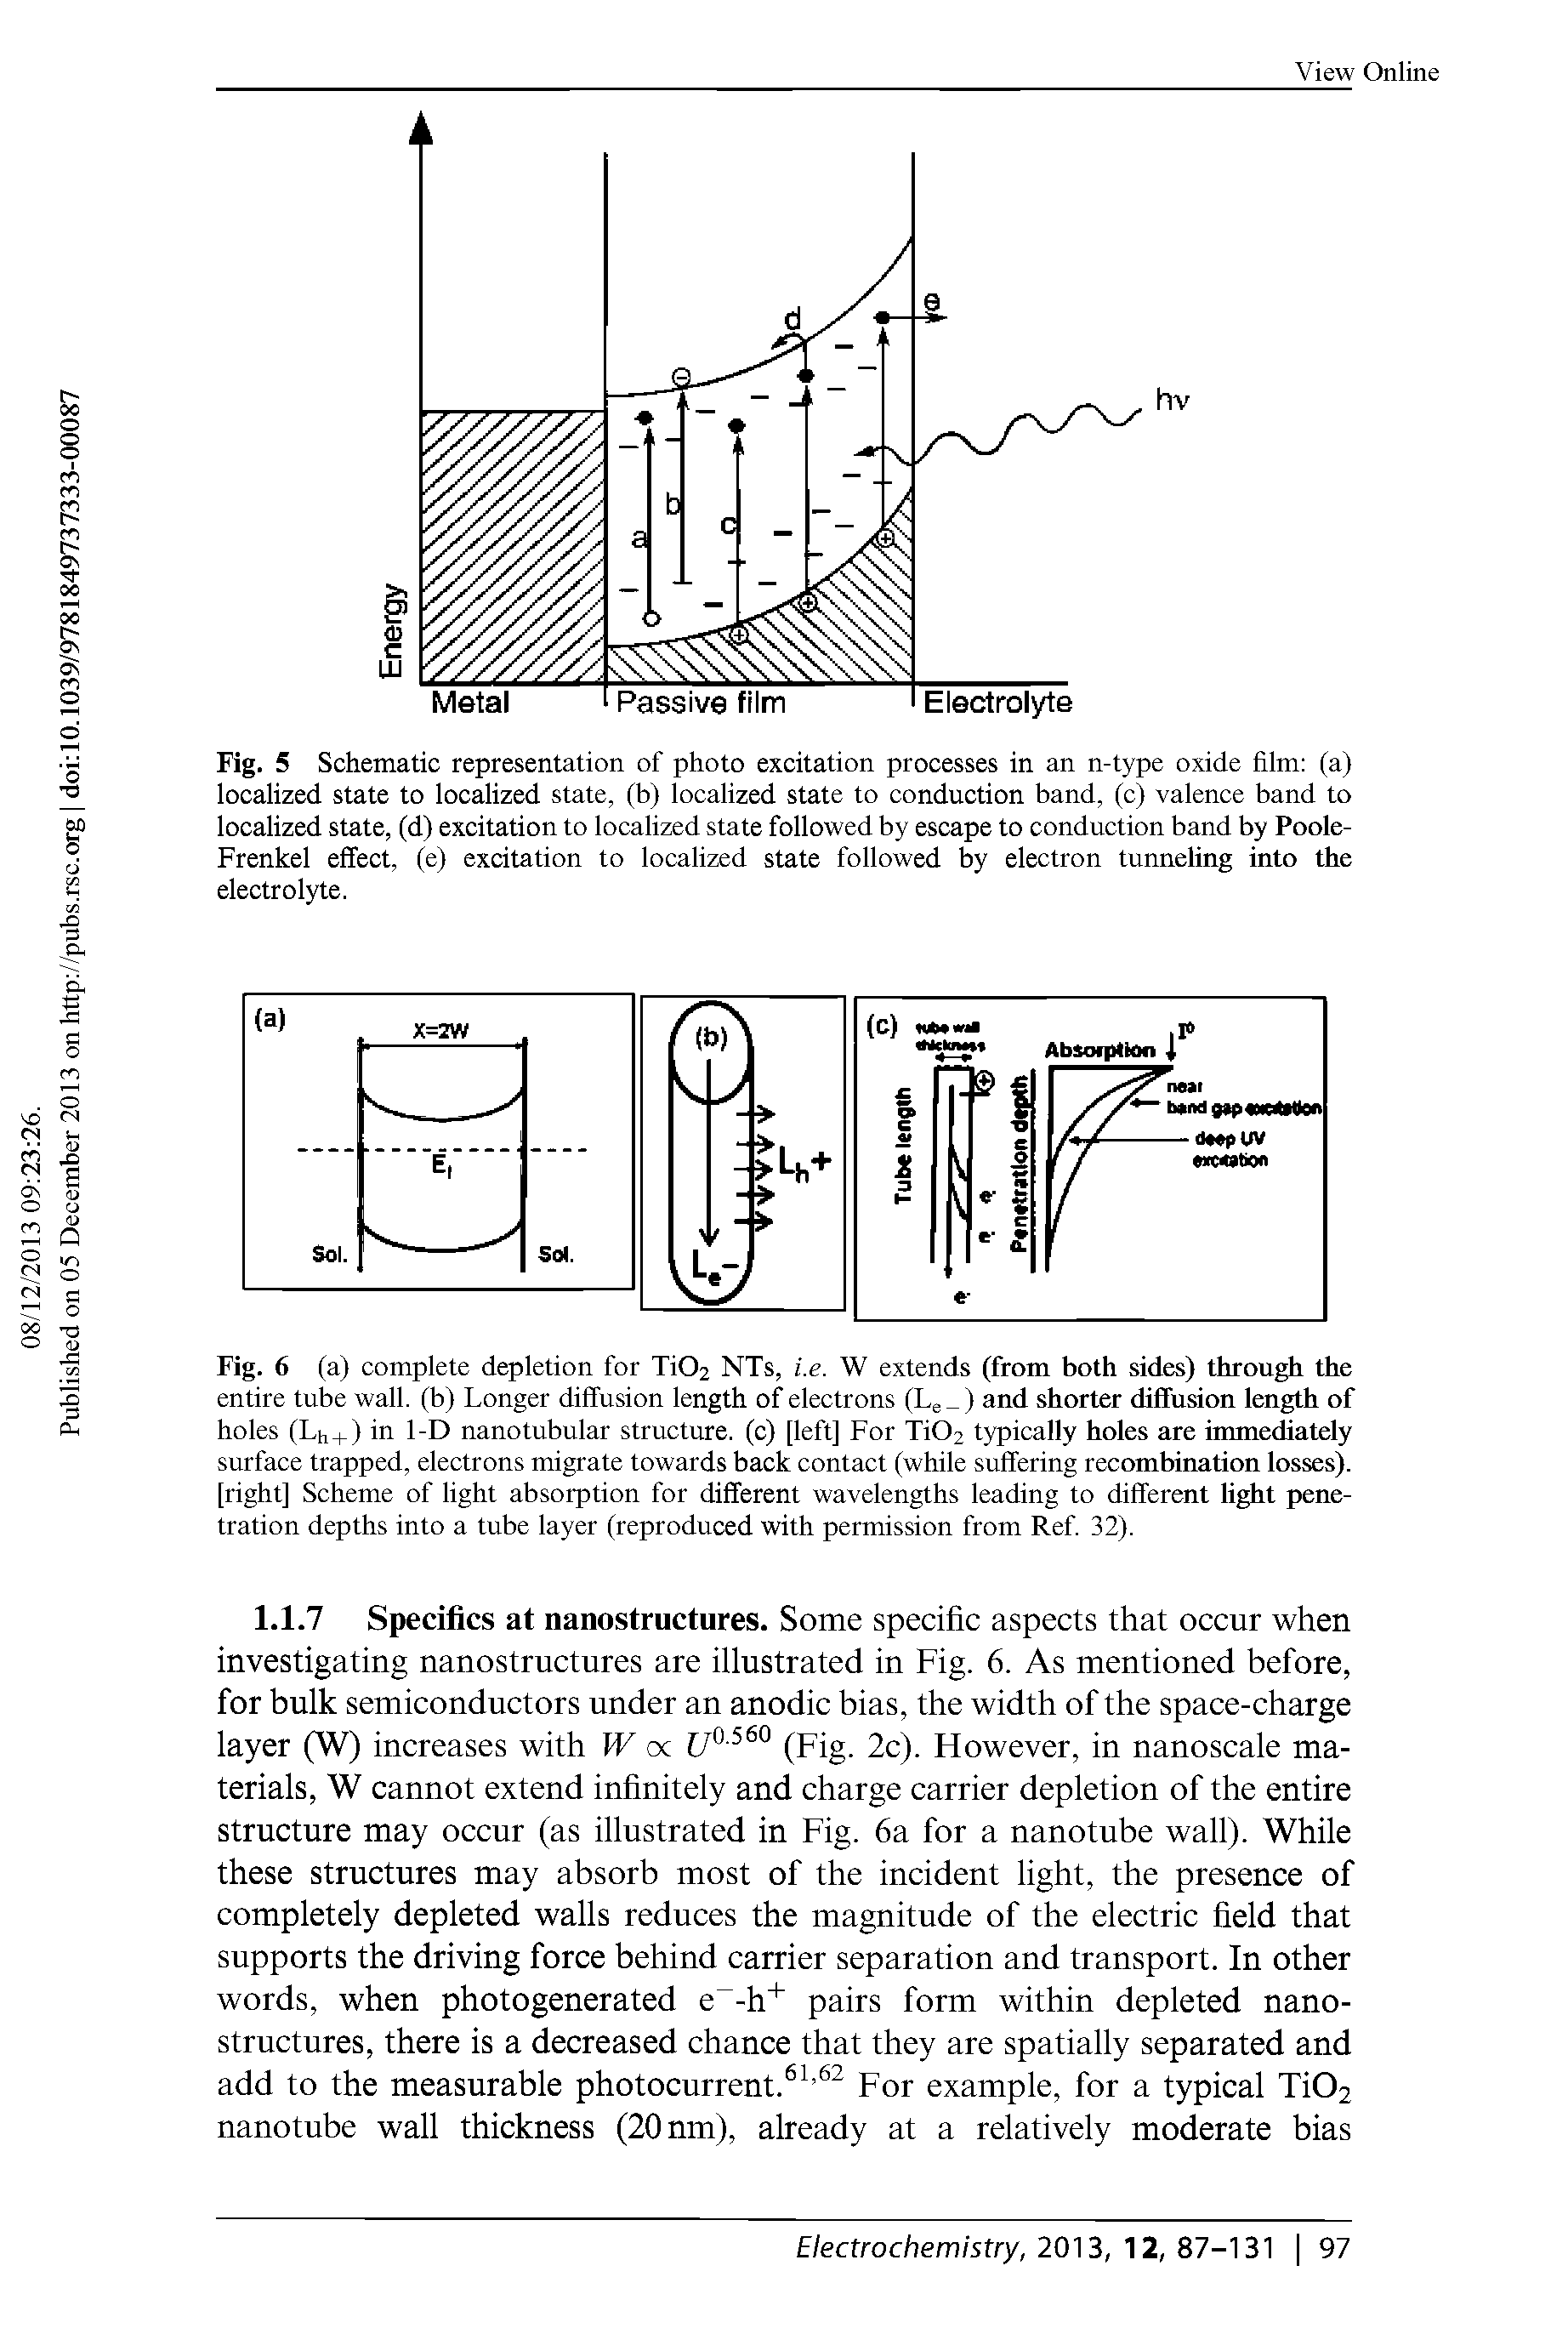 Fig. 5 Schematic representation of photo excitation processes in an n-type oxide film (a) localized state to localized state, (b) localized state to conduction band, (c) valence band to localized state, (d) excitation to localized state followed by escape to conduction band by Poole-Frenkel effect, (e) excitation to localized state followed by electron tunneling into the electrolyte.